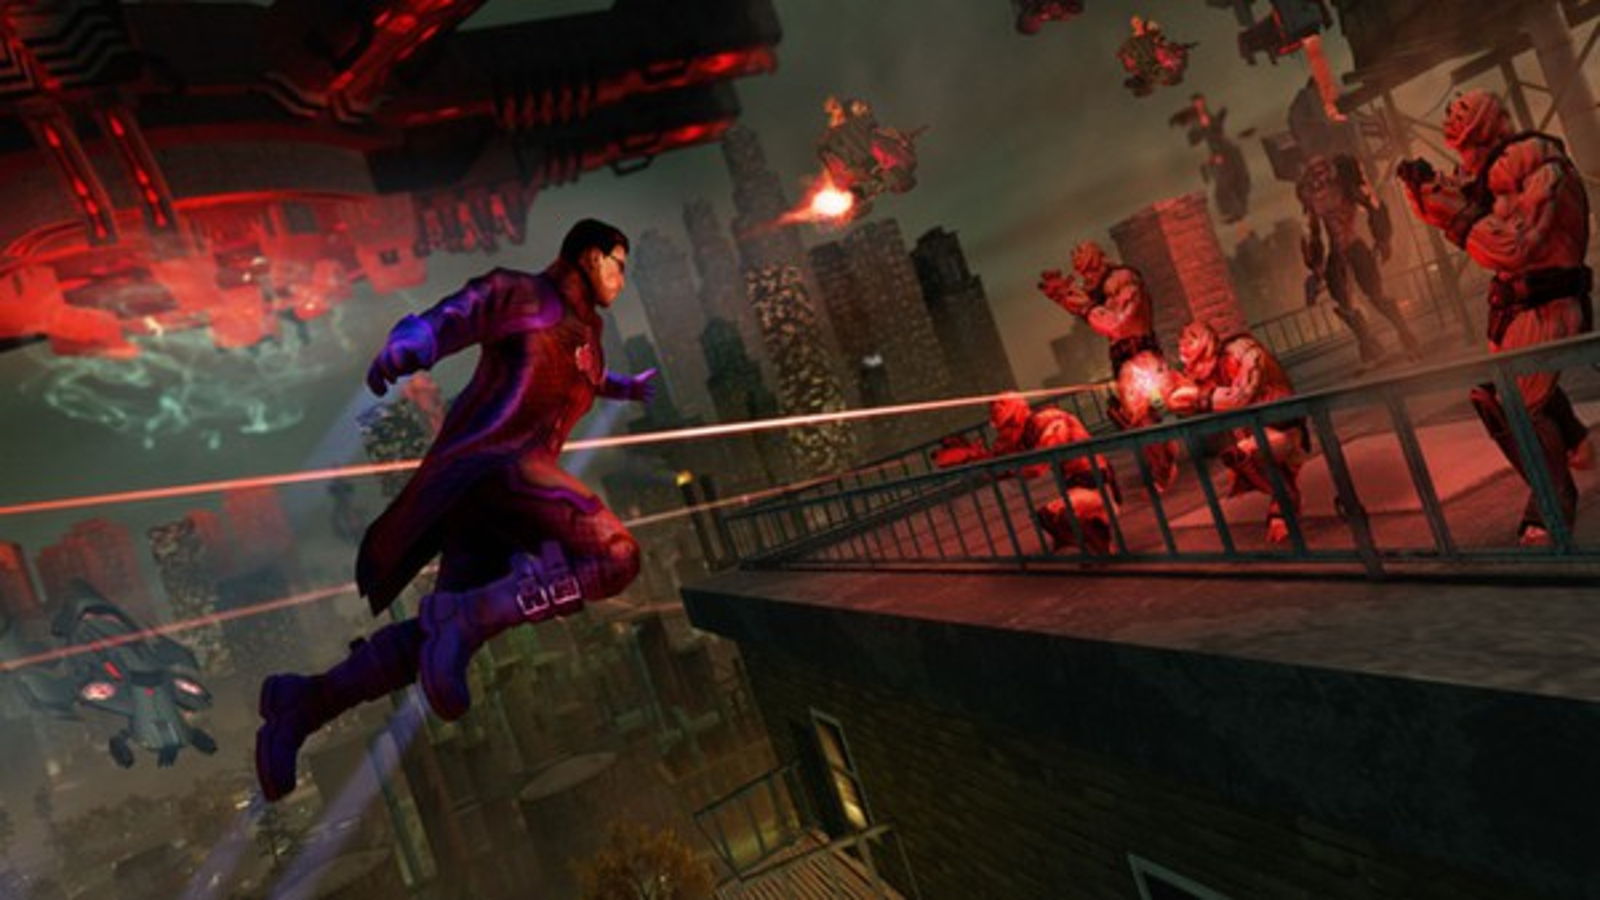 Prædike identifikation myg Saints Row 4 Cheats For Xbox One, PS4, PC, Xbox 360 and PS3 | VG247